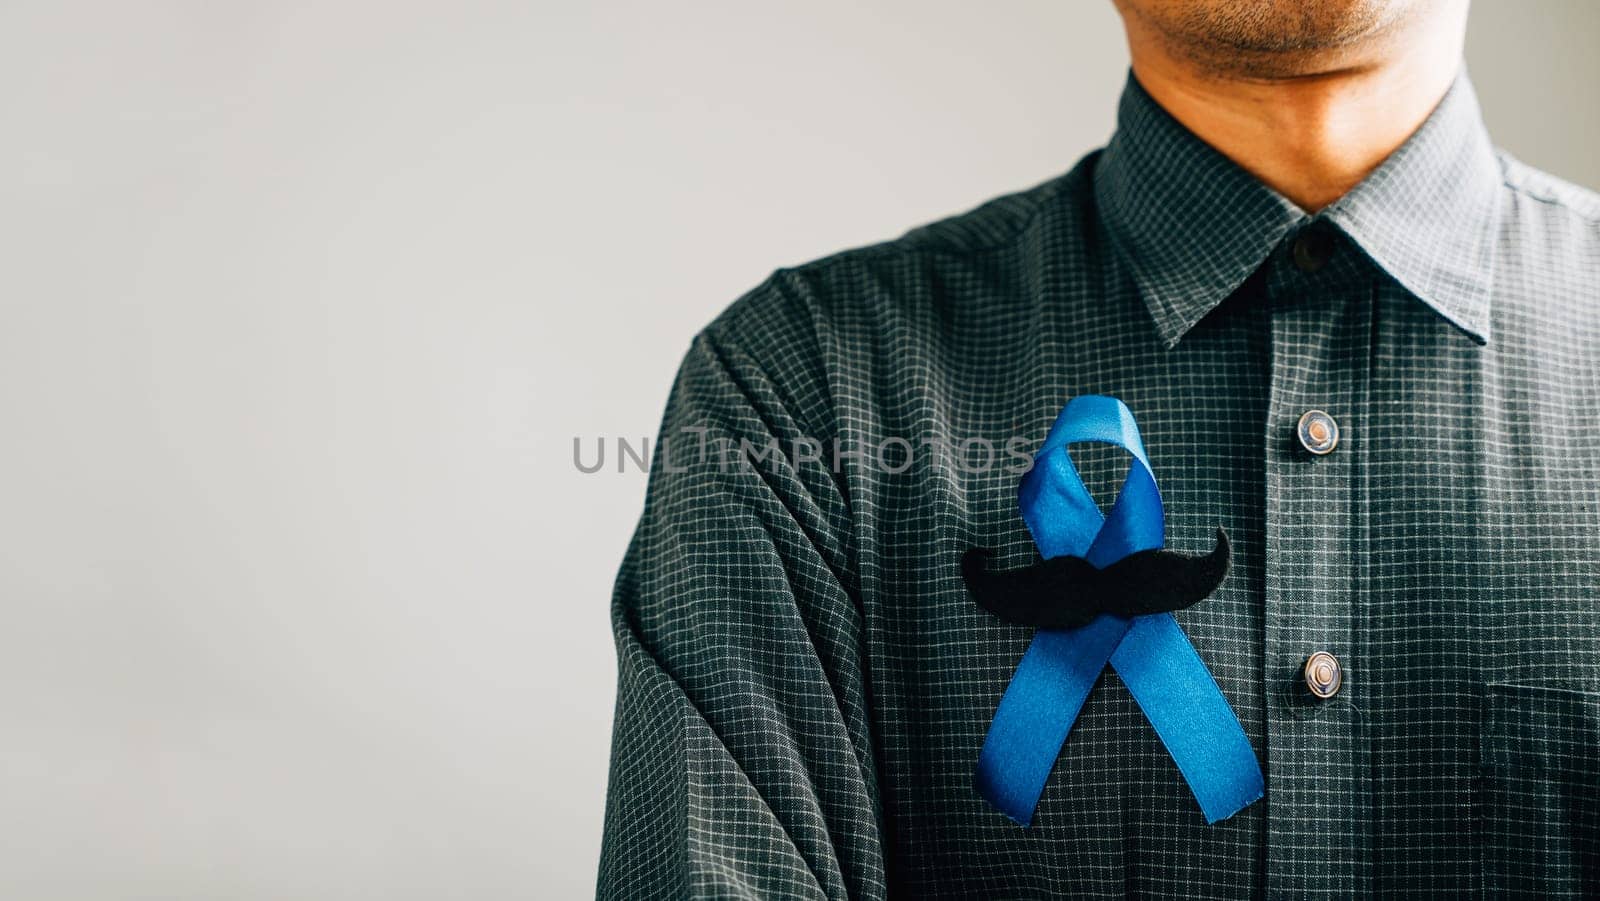 In support of vital causes, men's hands feature a Blue Ribbon with a moustache by Sorapop